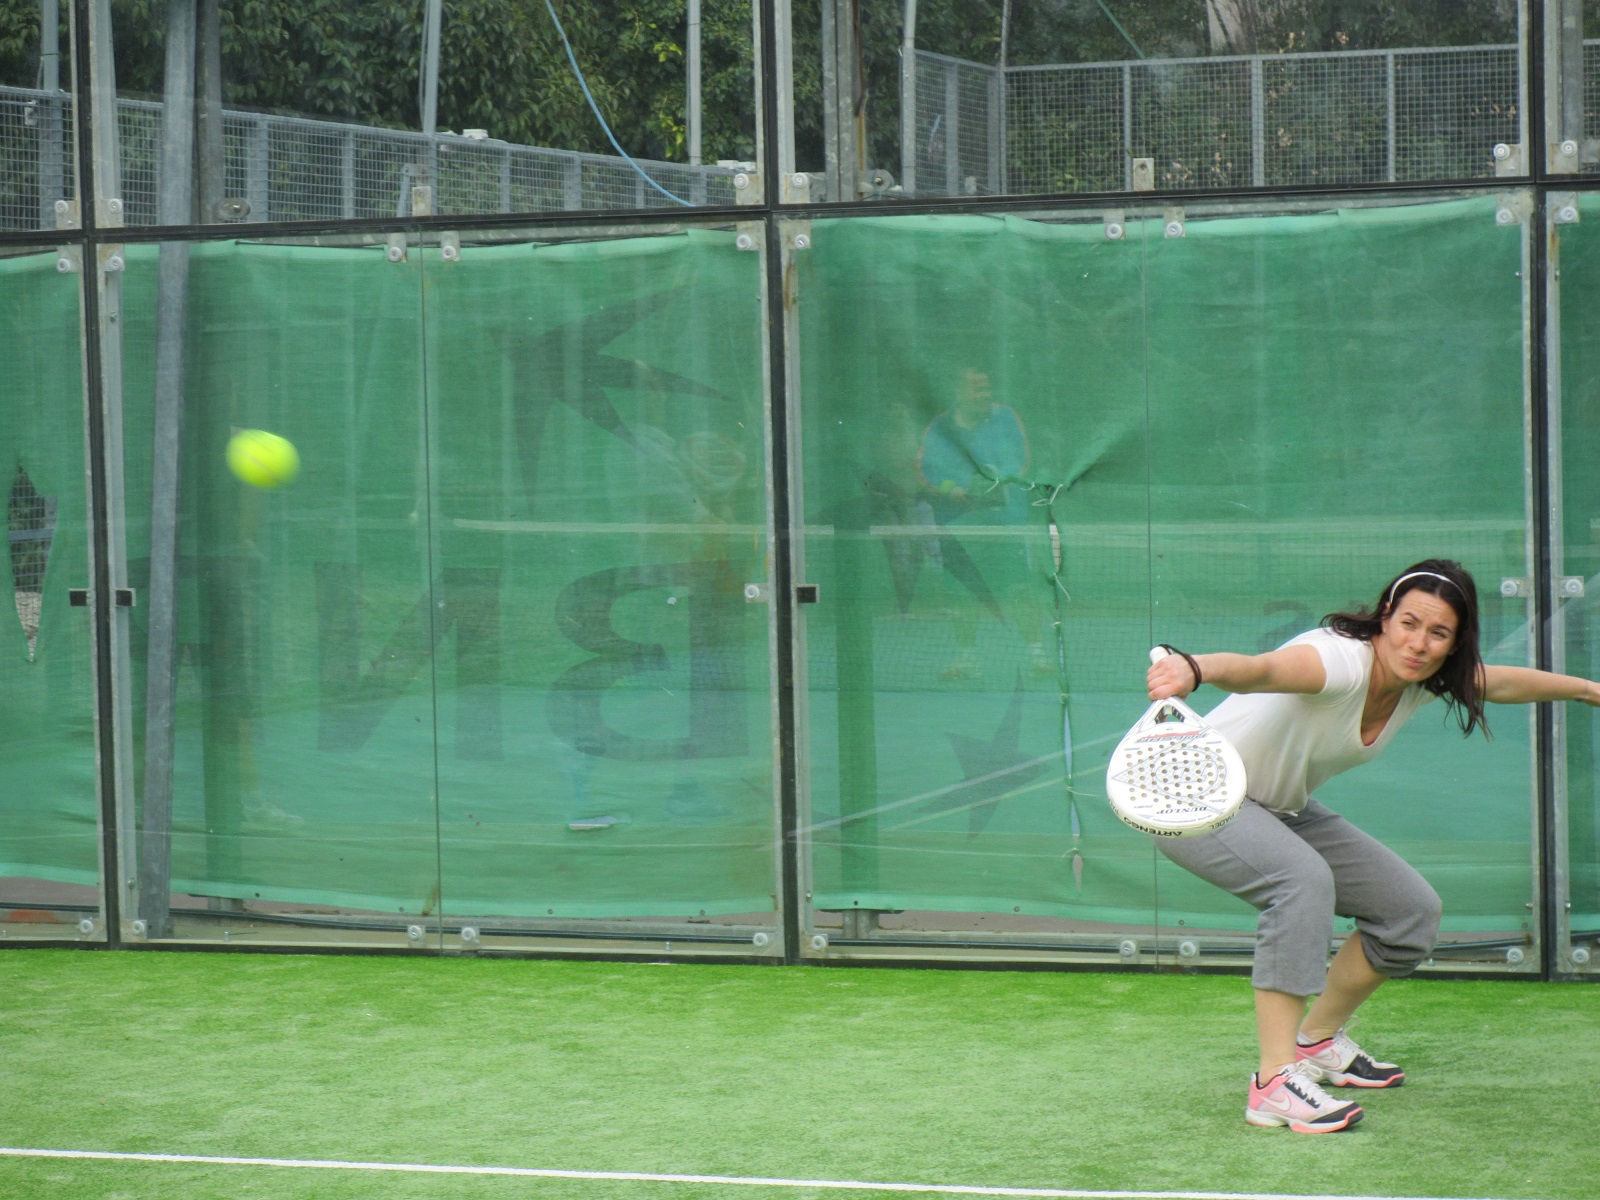 A 2nd short of padel at the Marseille Tennis Club